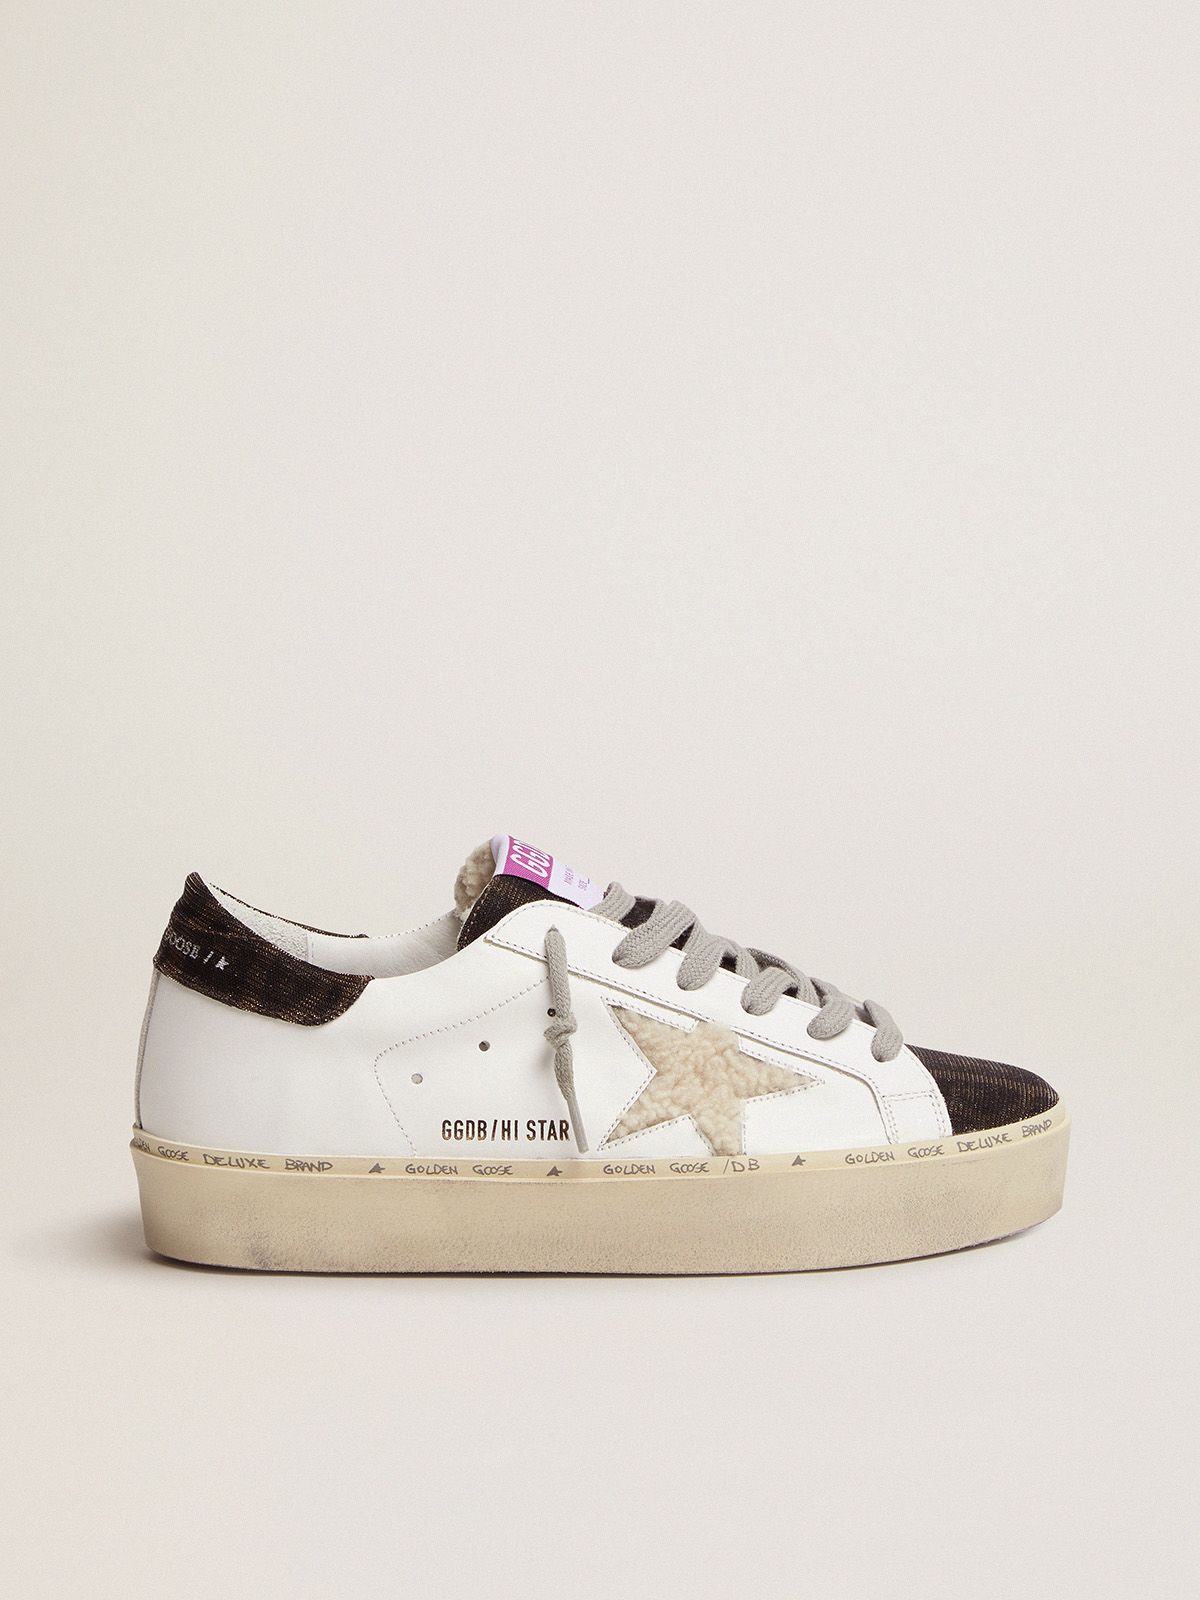 golden goose leopard-print with shearling sneakers and Star Hi tongue star